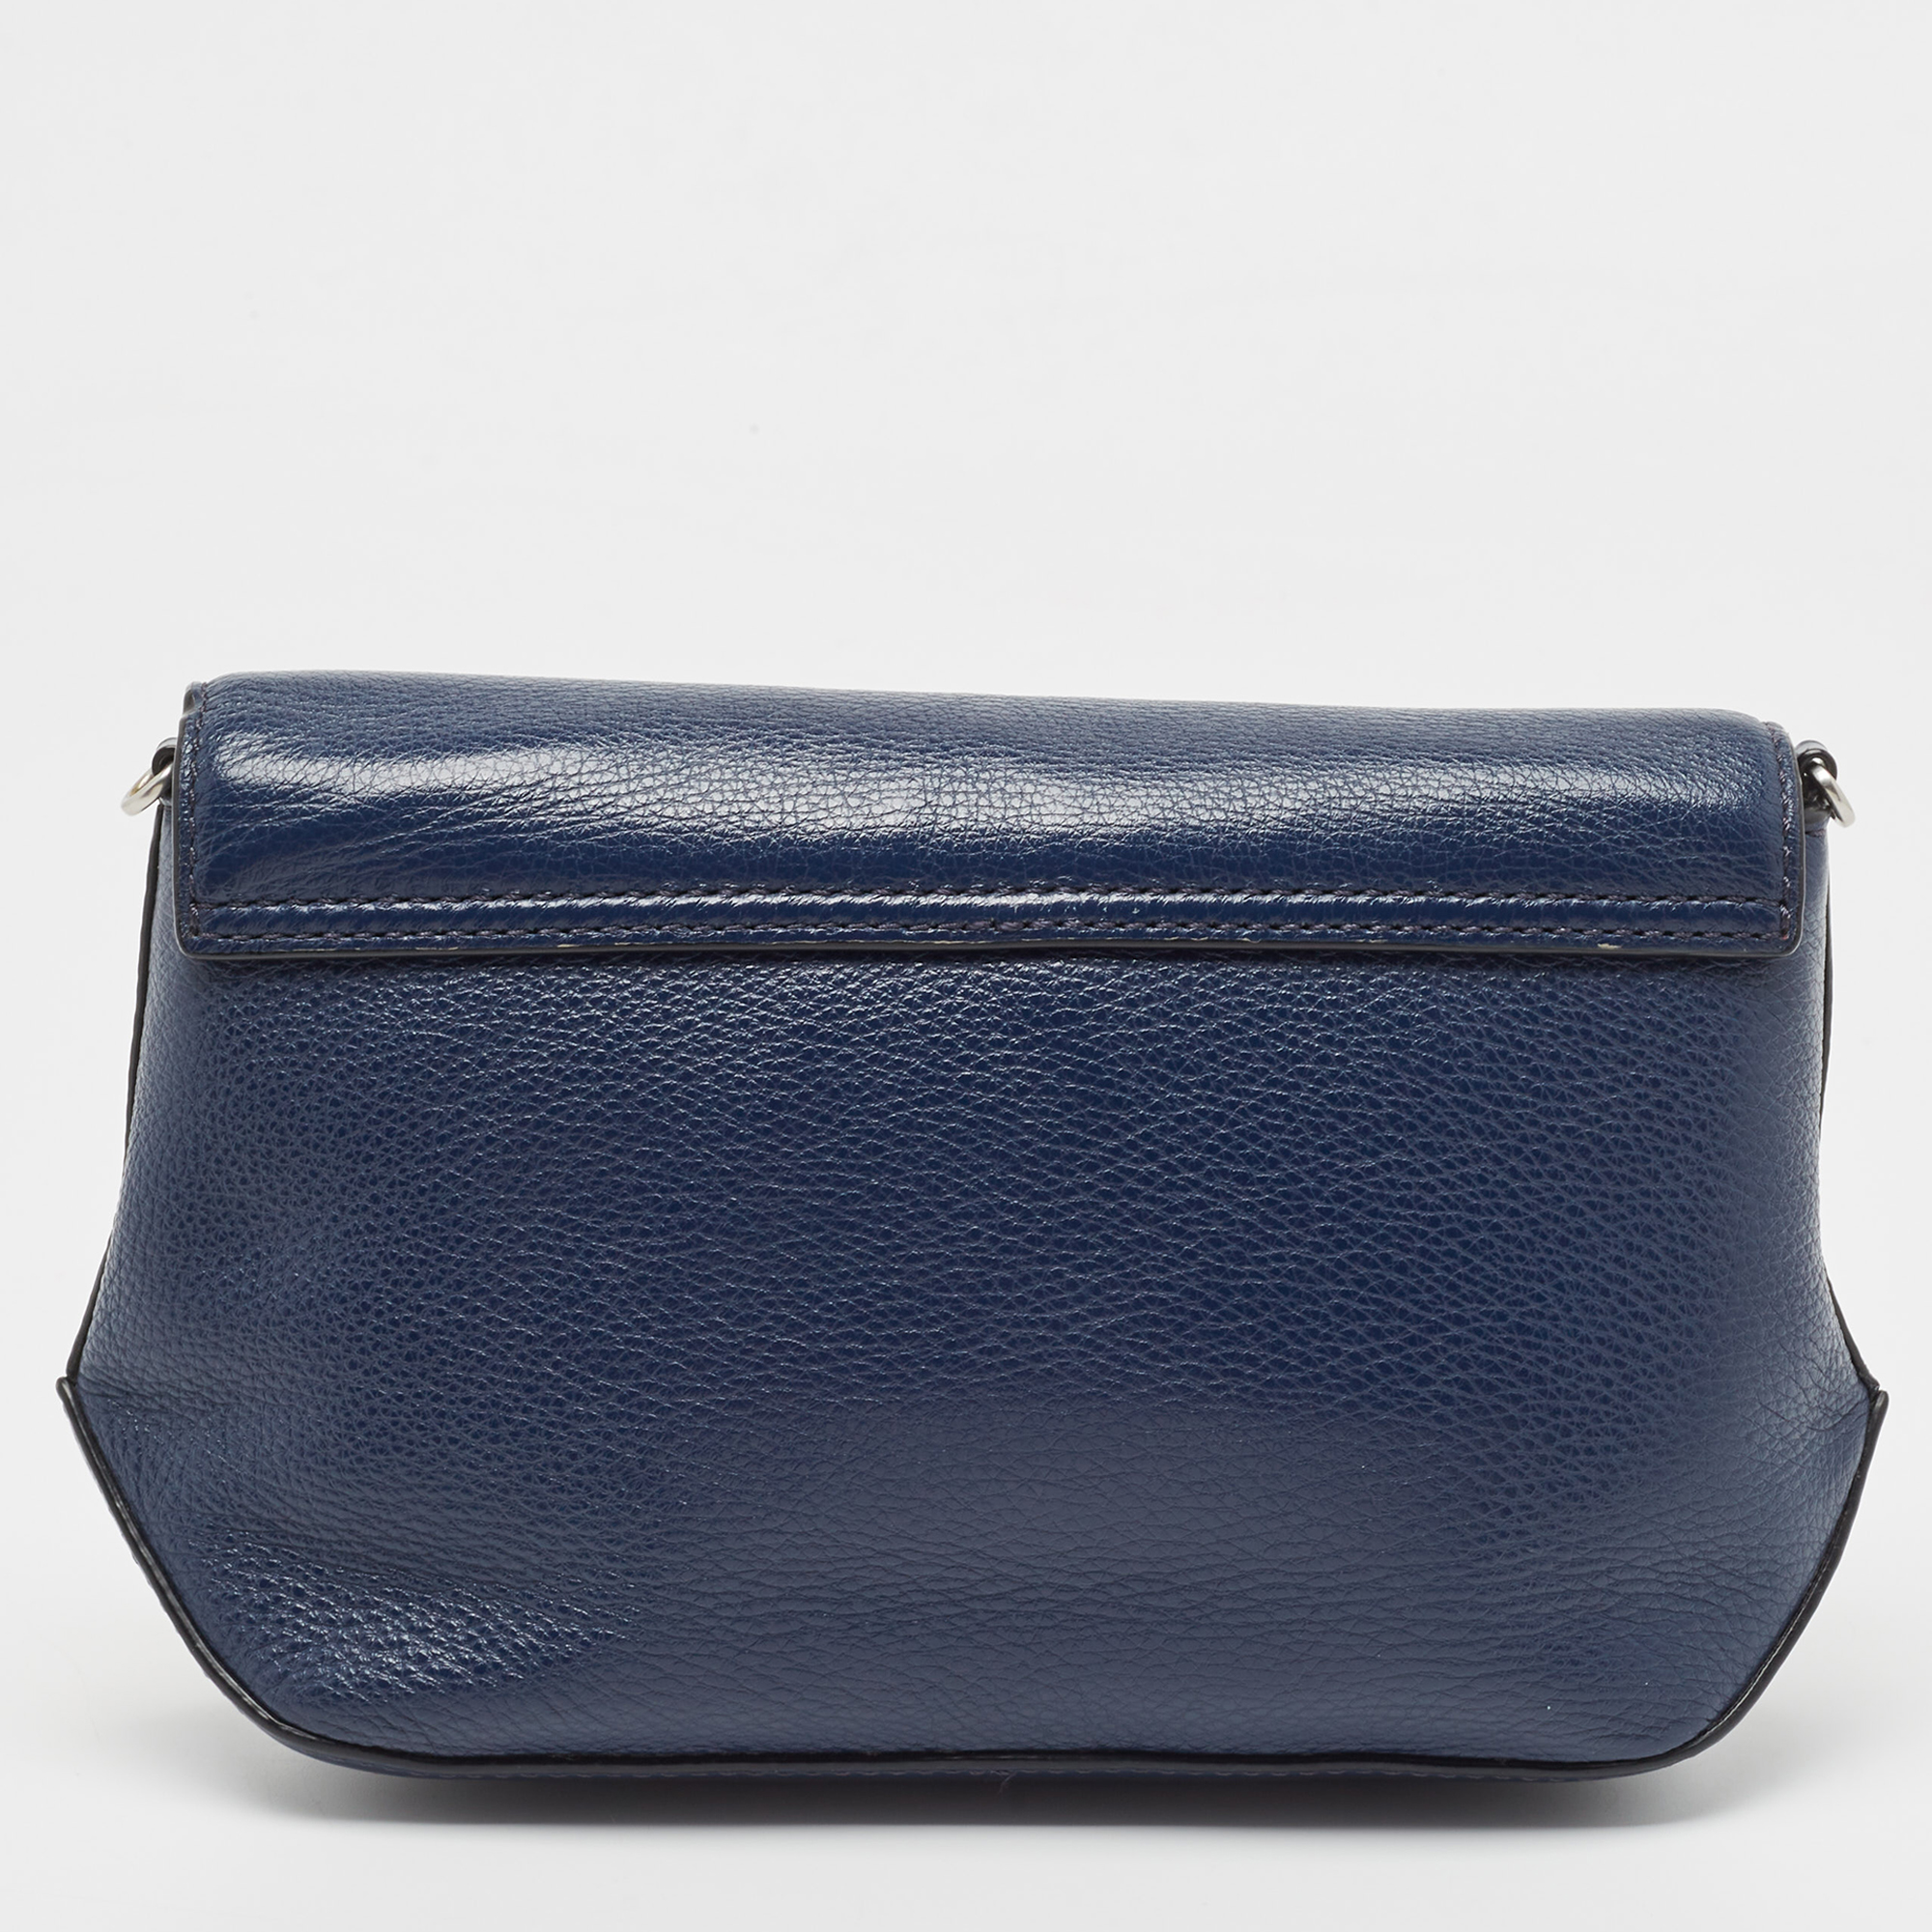 Marc Jacobs Navy Blue Leather Too Hot To Handle Noa Crossbody Bag